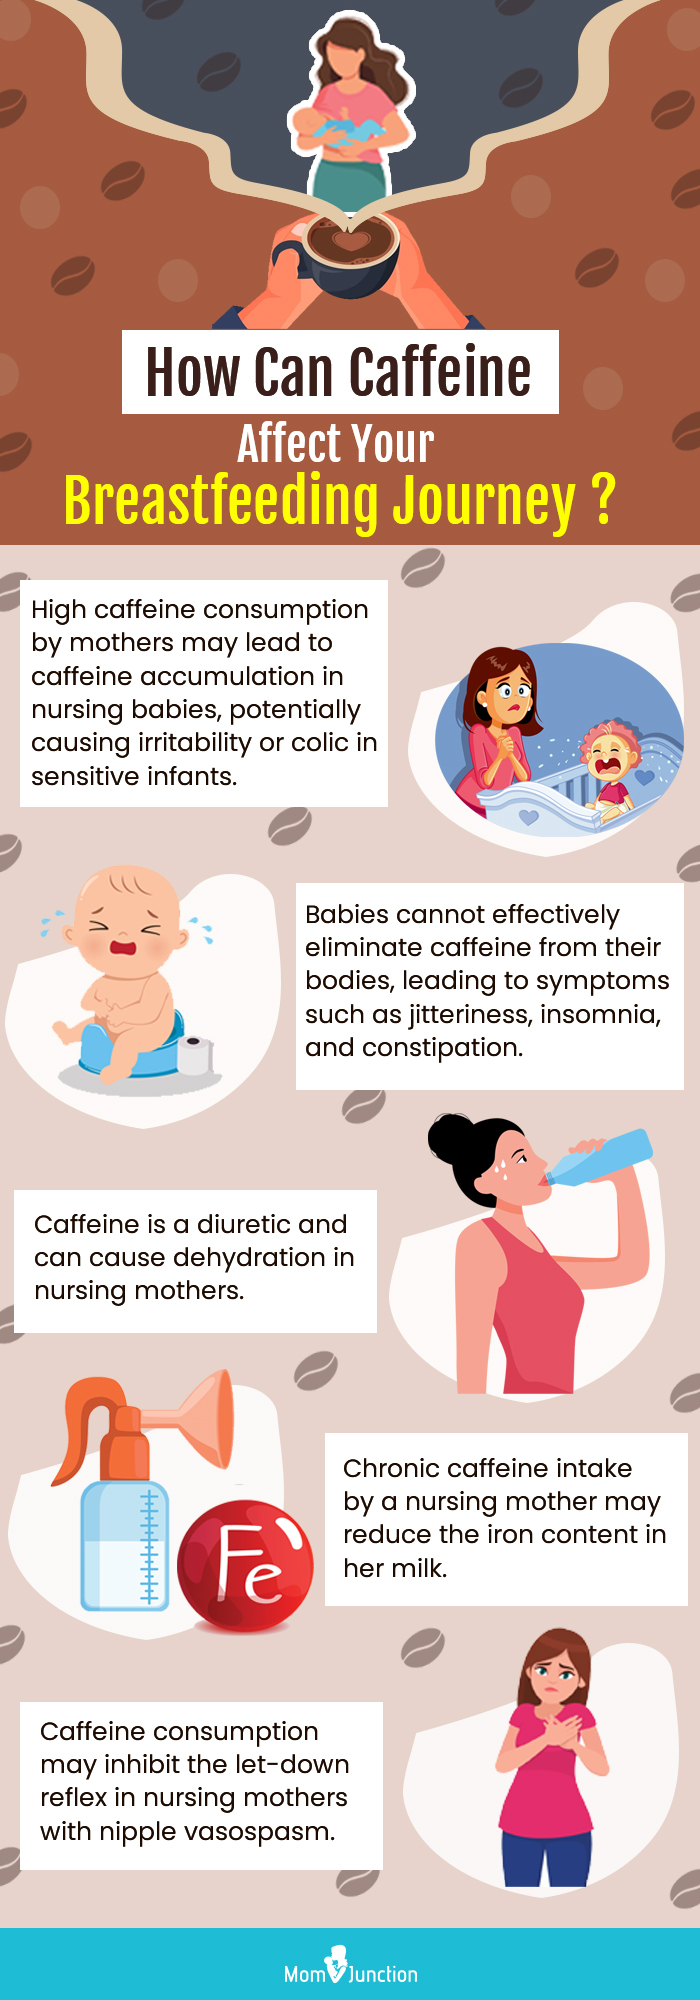 how can caffeine affect your breastfeeding journey (infographic)